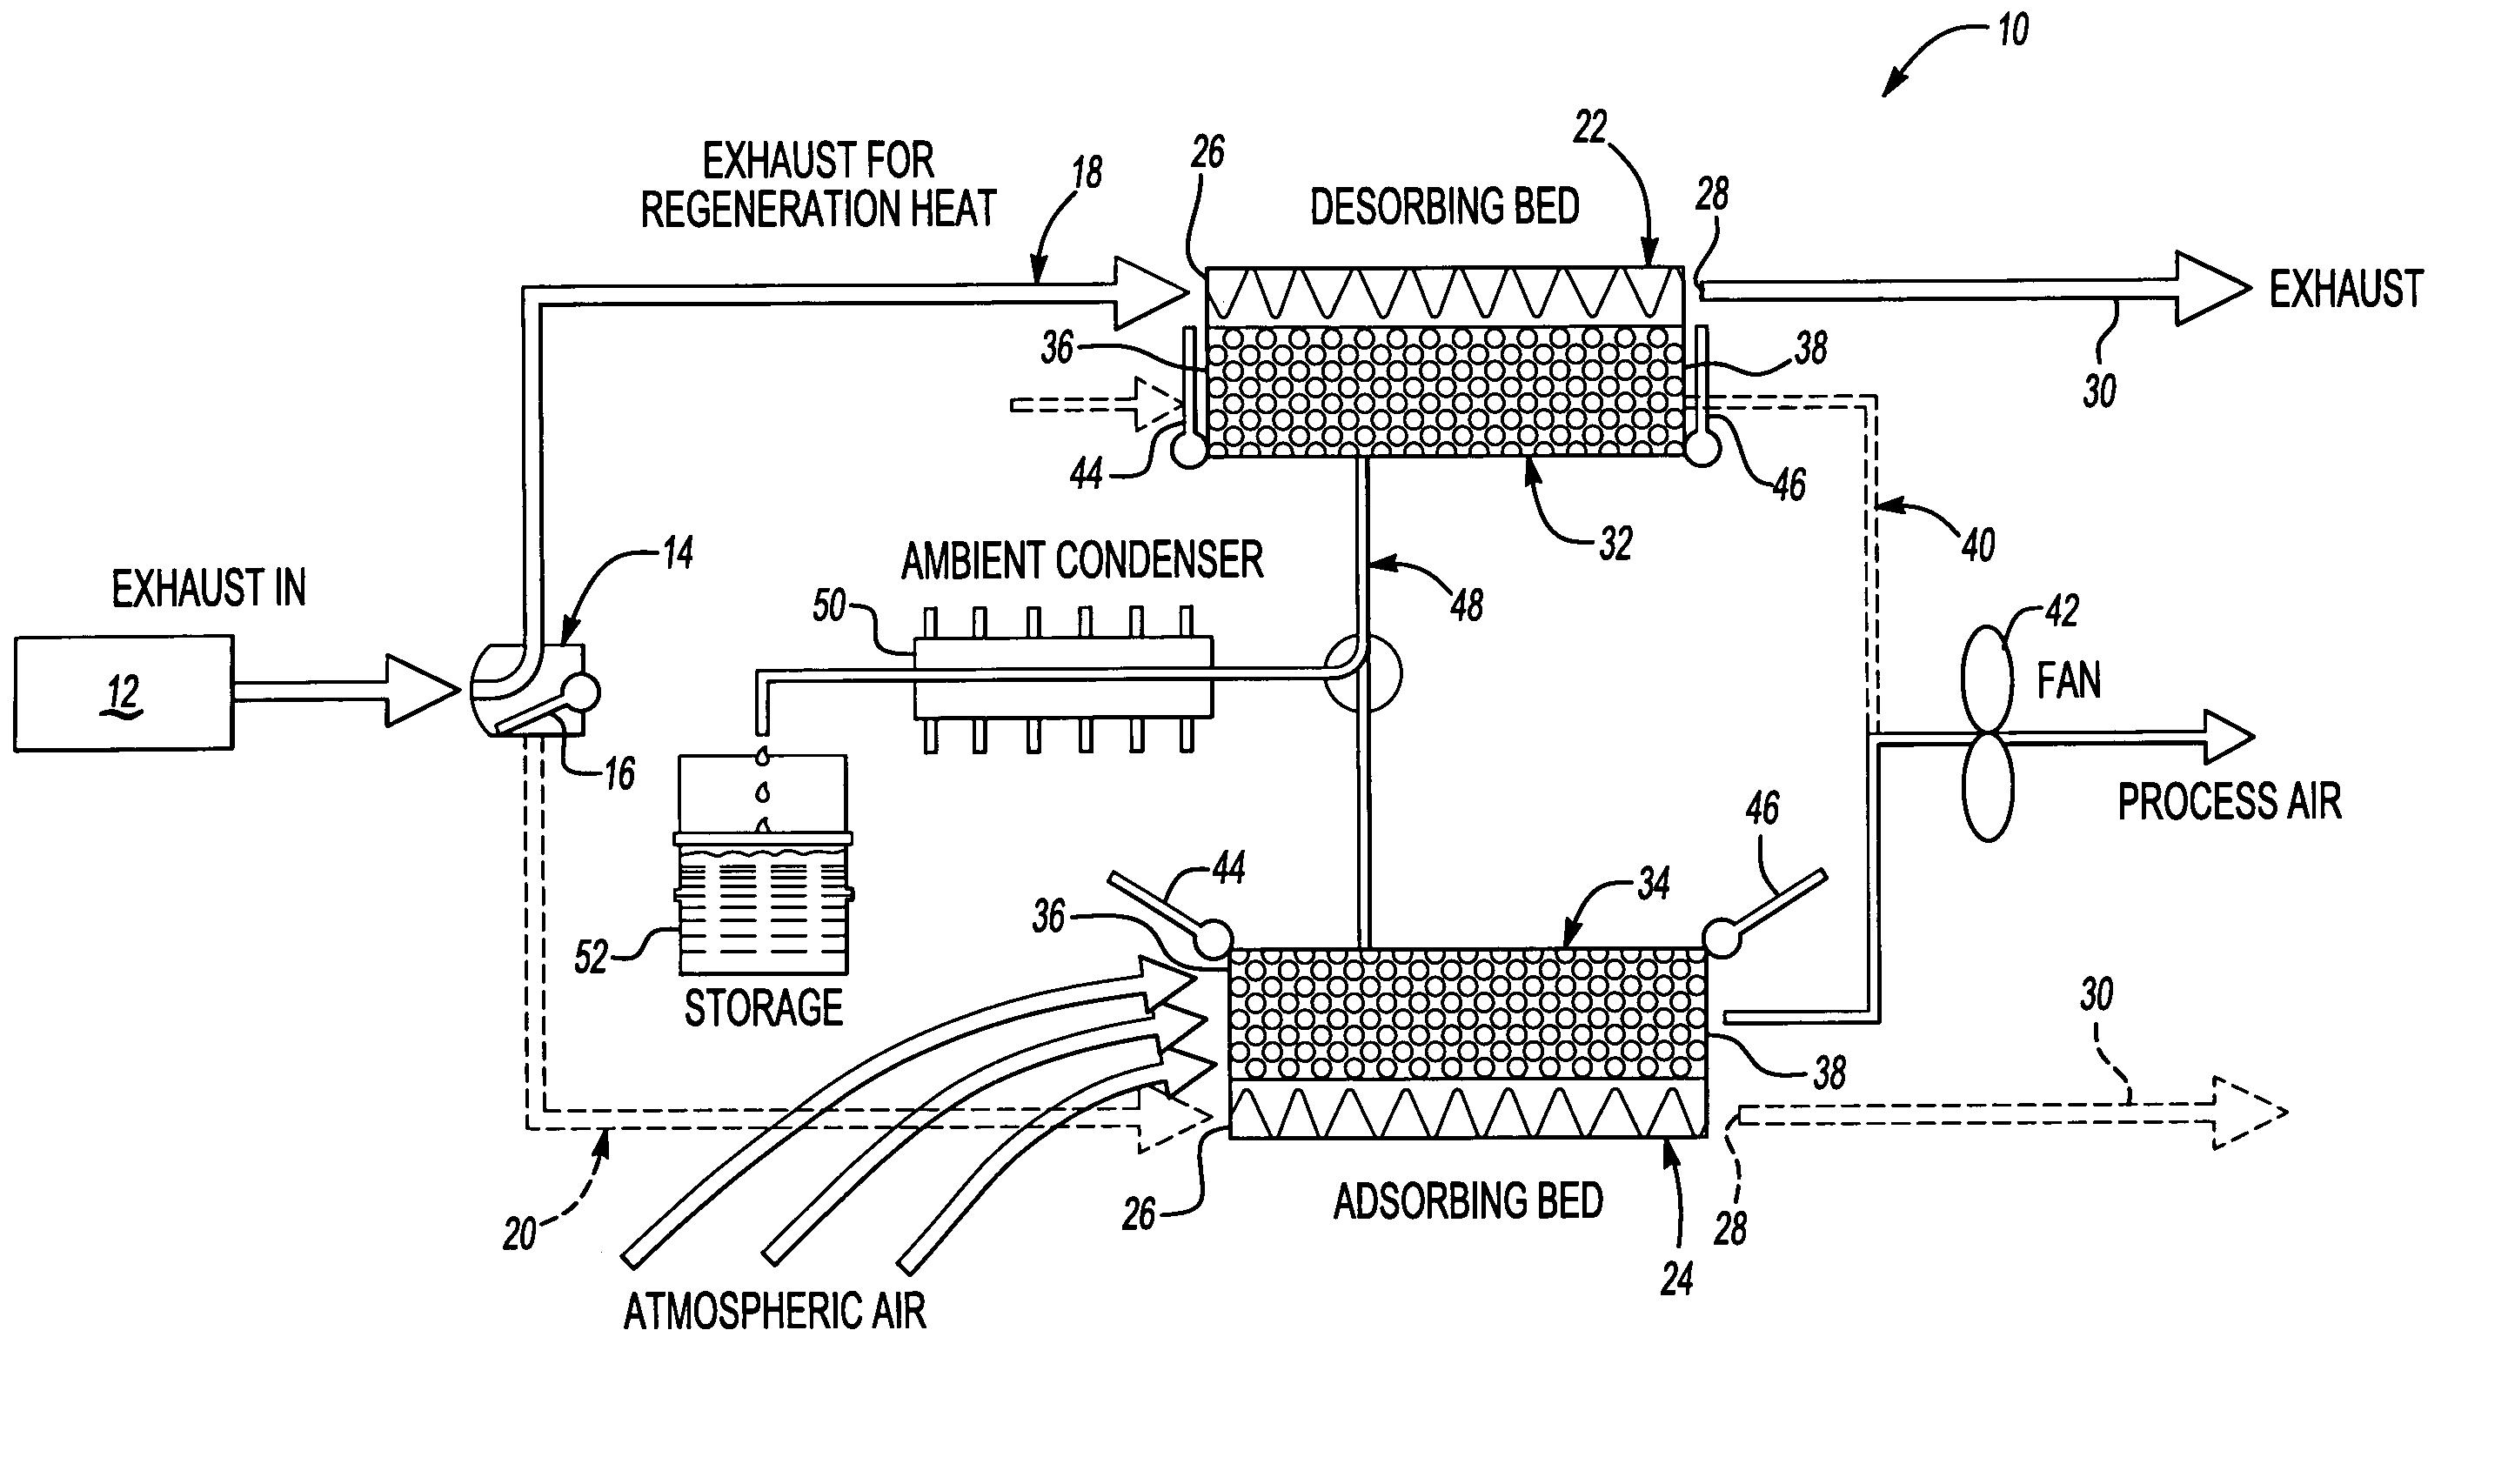 Water-from-air using liquid desiccant and vehicle exhaust